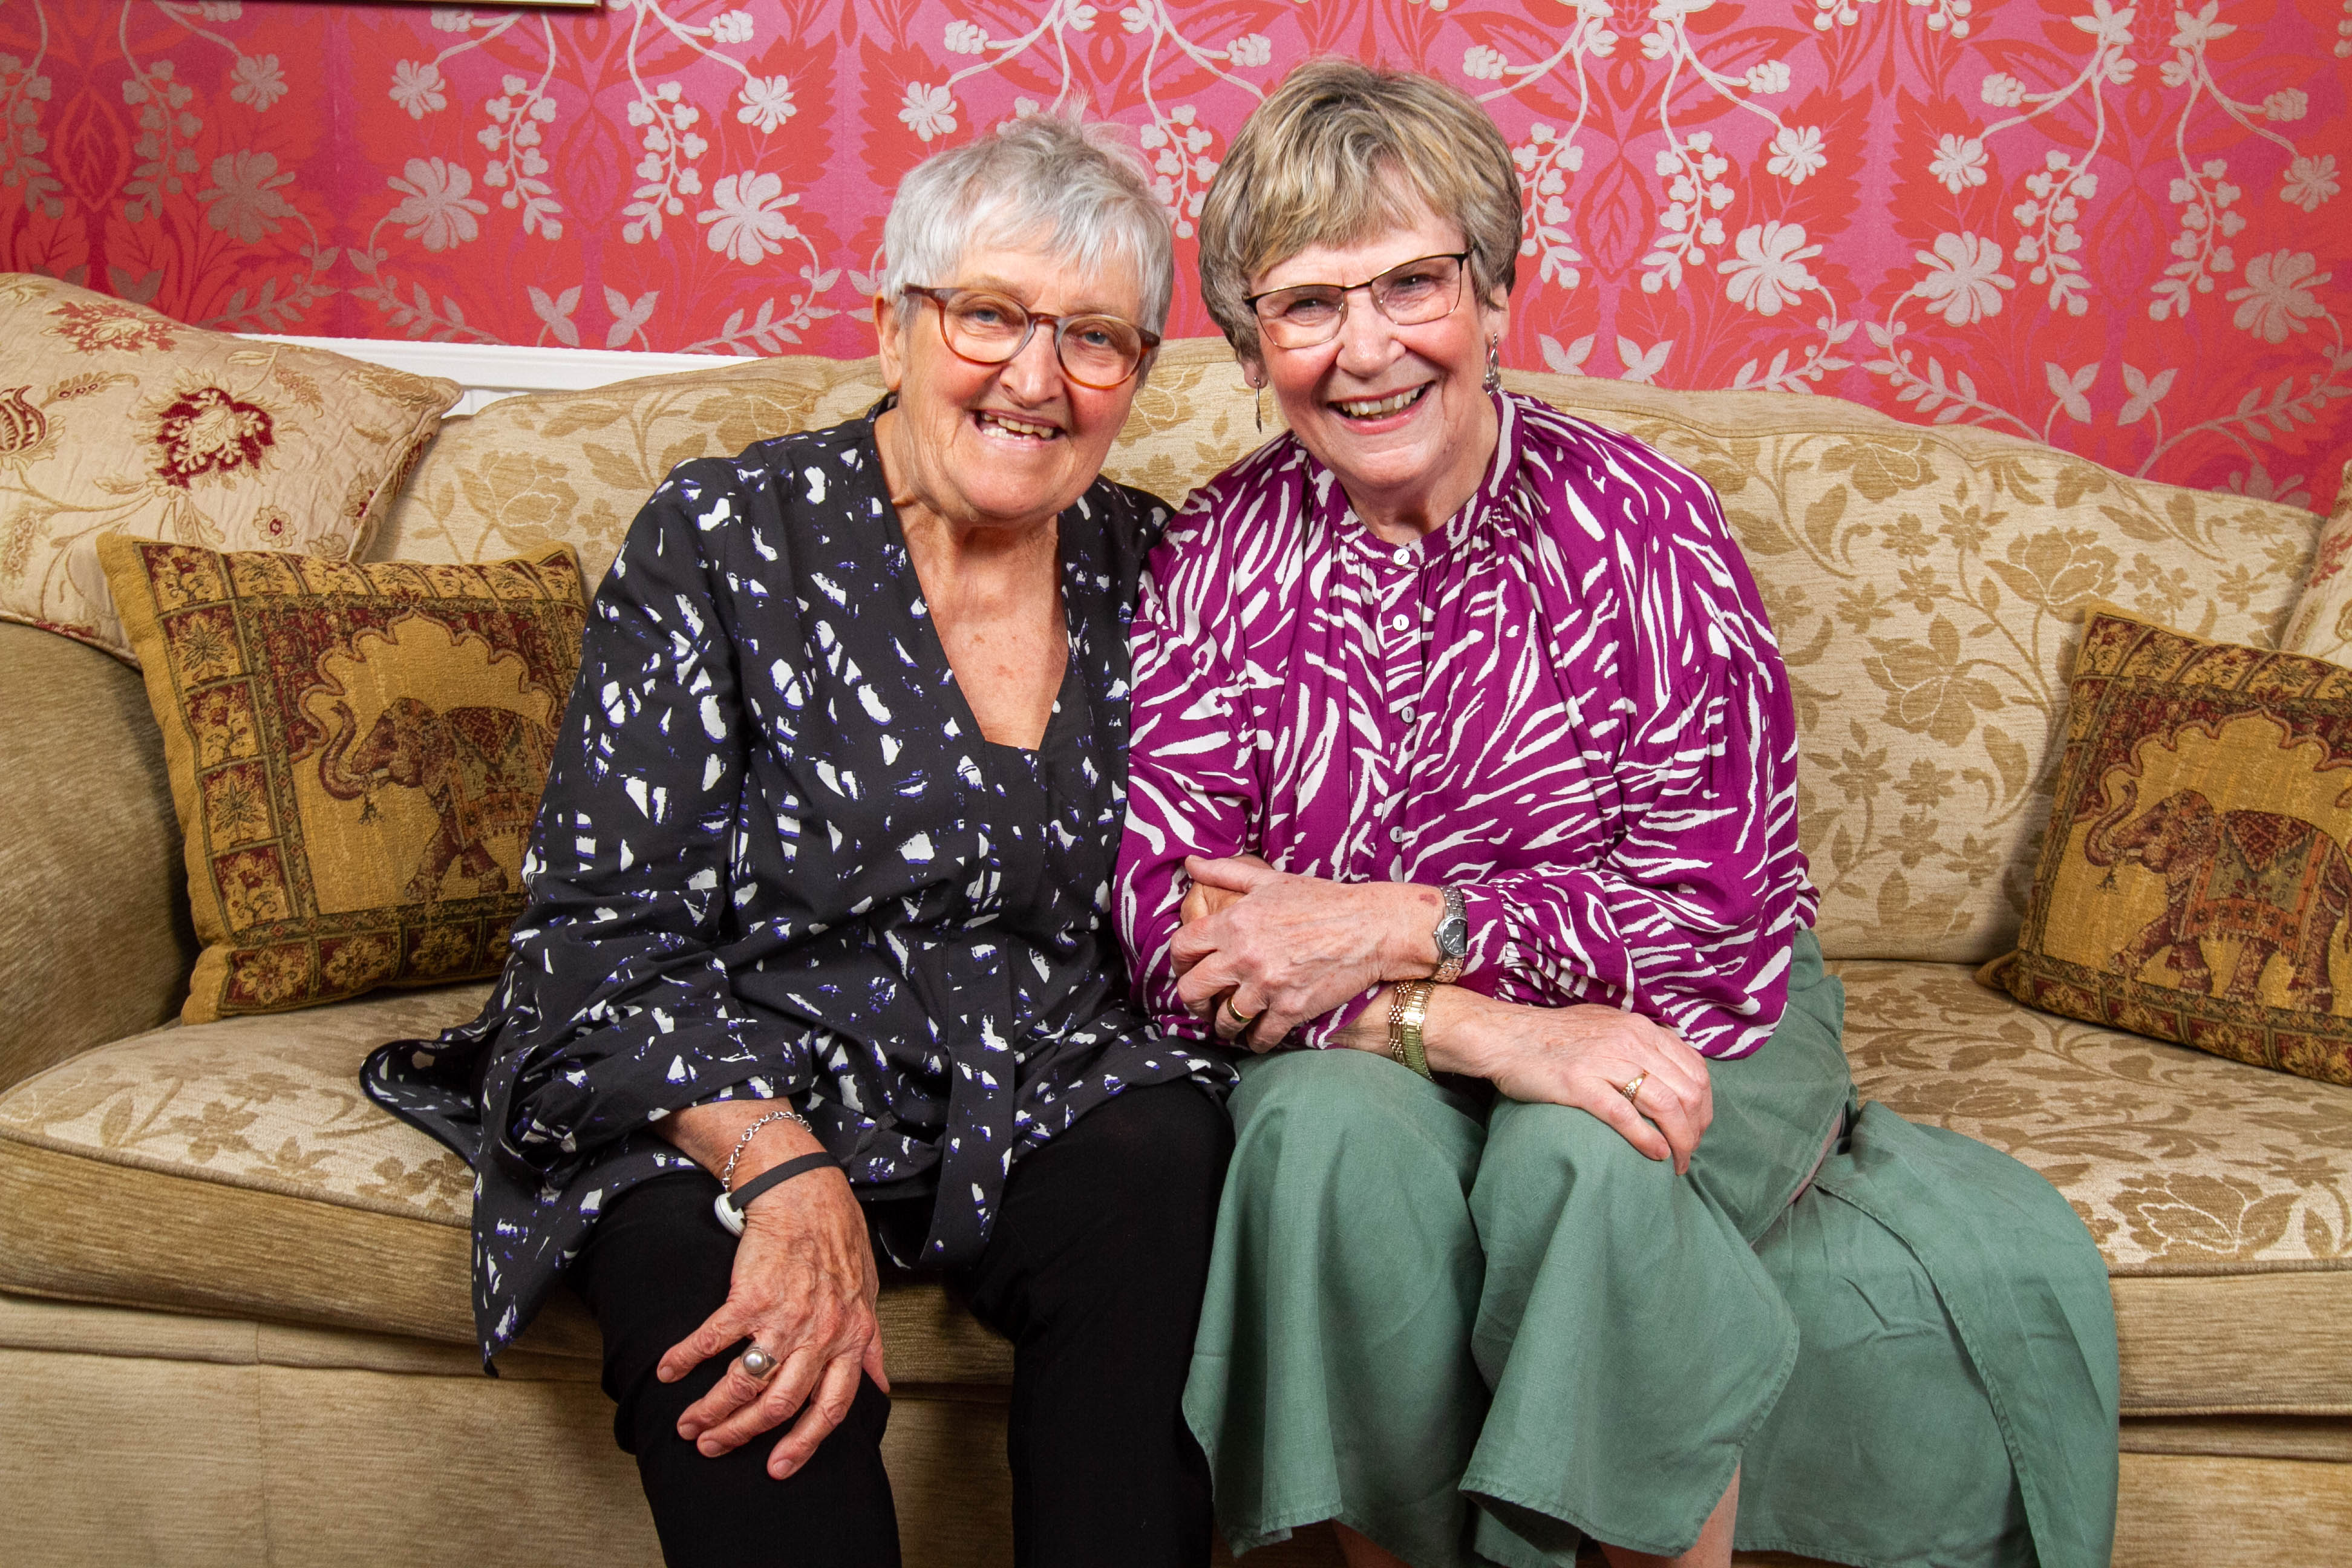 Terry Cunningham (purple) and her friend Rosemary have been friends for years.